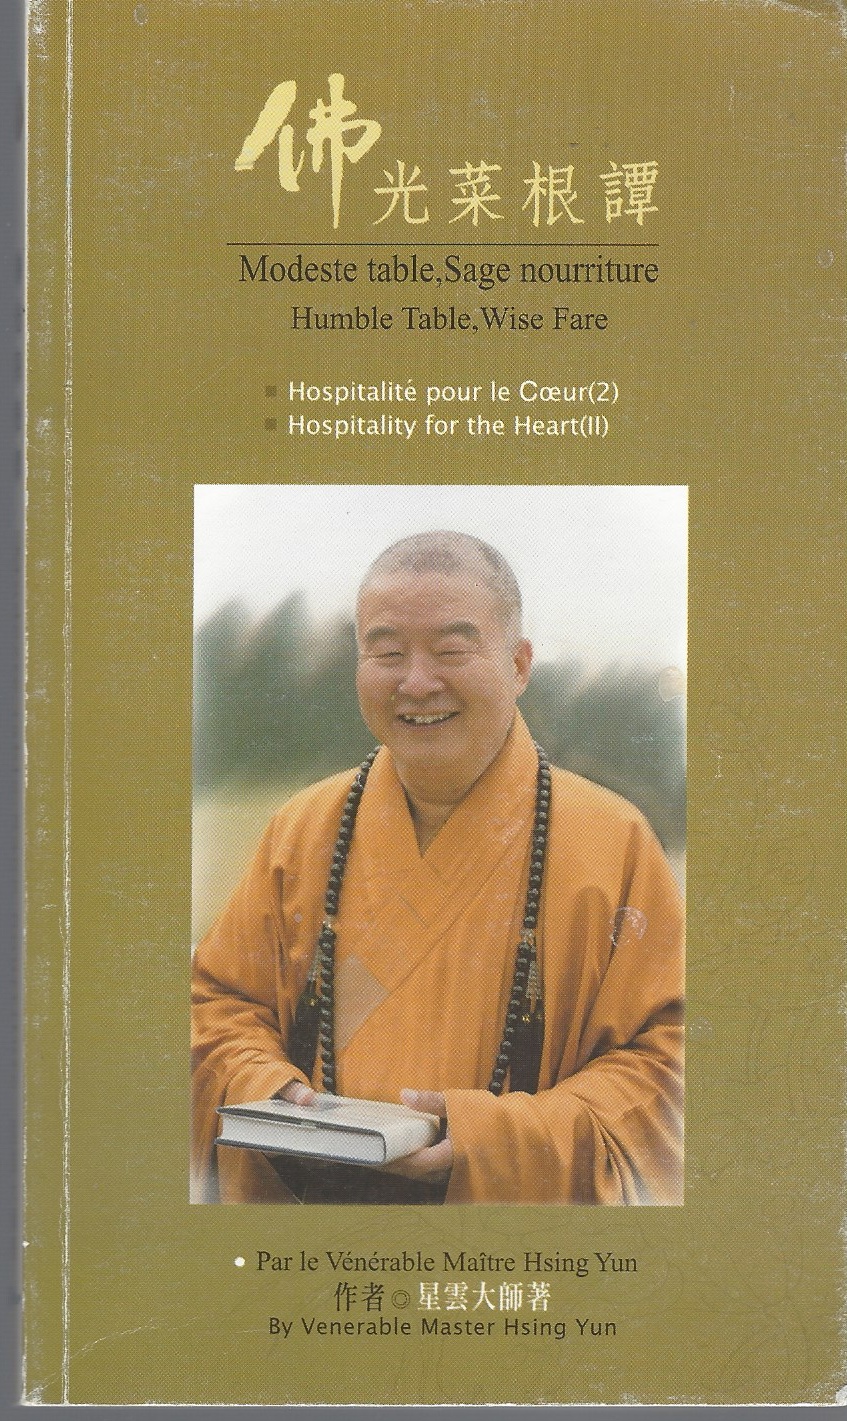 YUN, VENERABLE MASTER HSING - Humble Table, Wise Fare / Modeste Table, Sage Nourriture Hospitality for the Heart